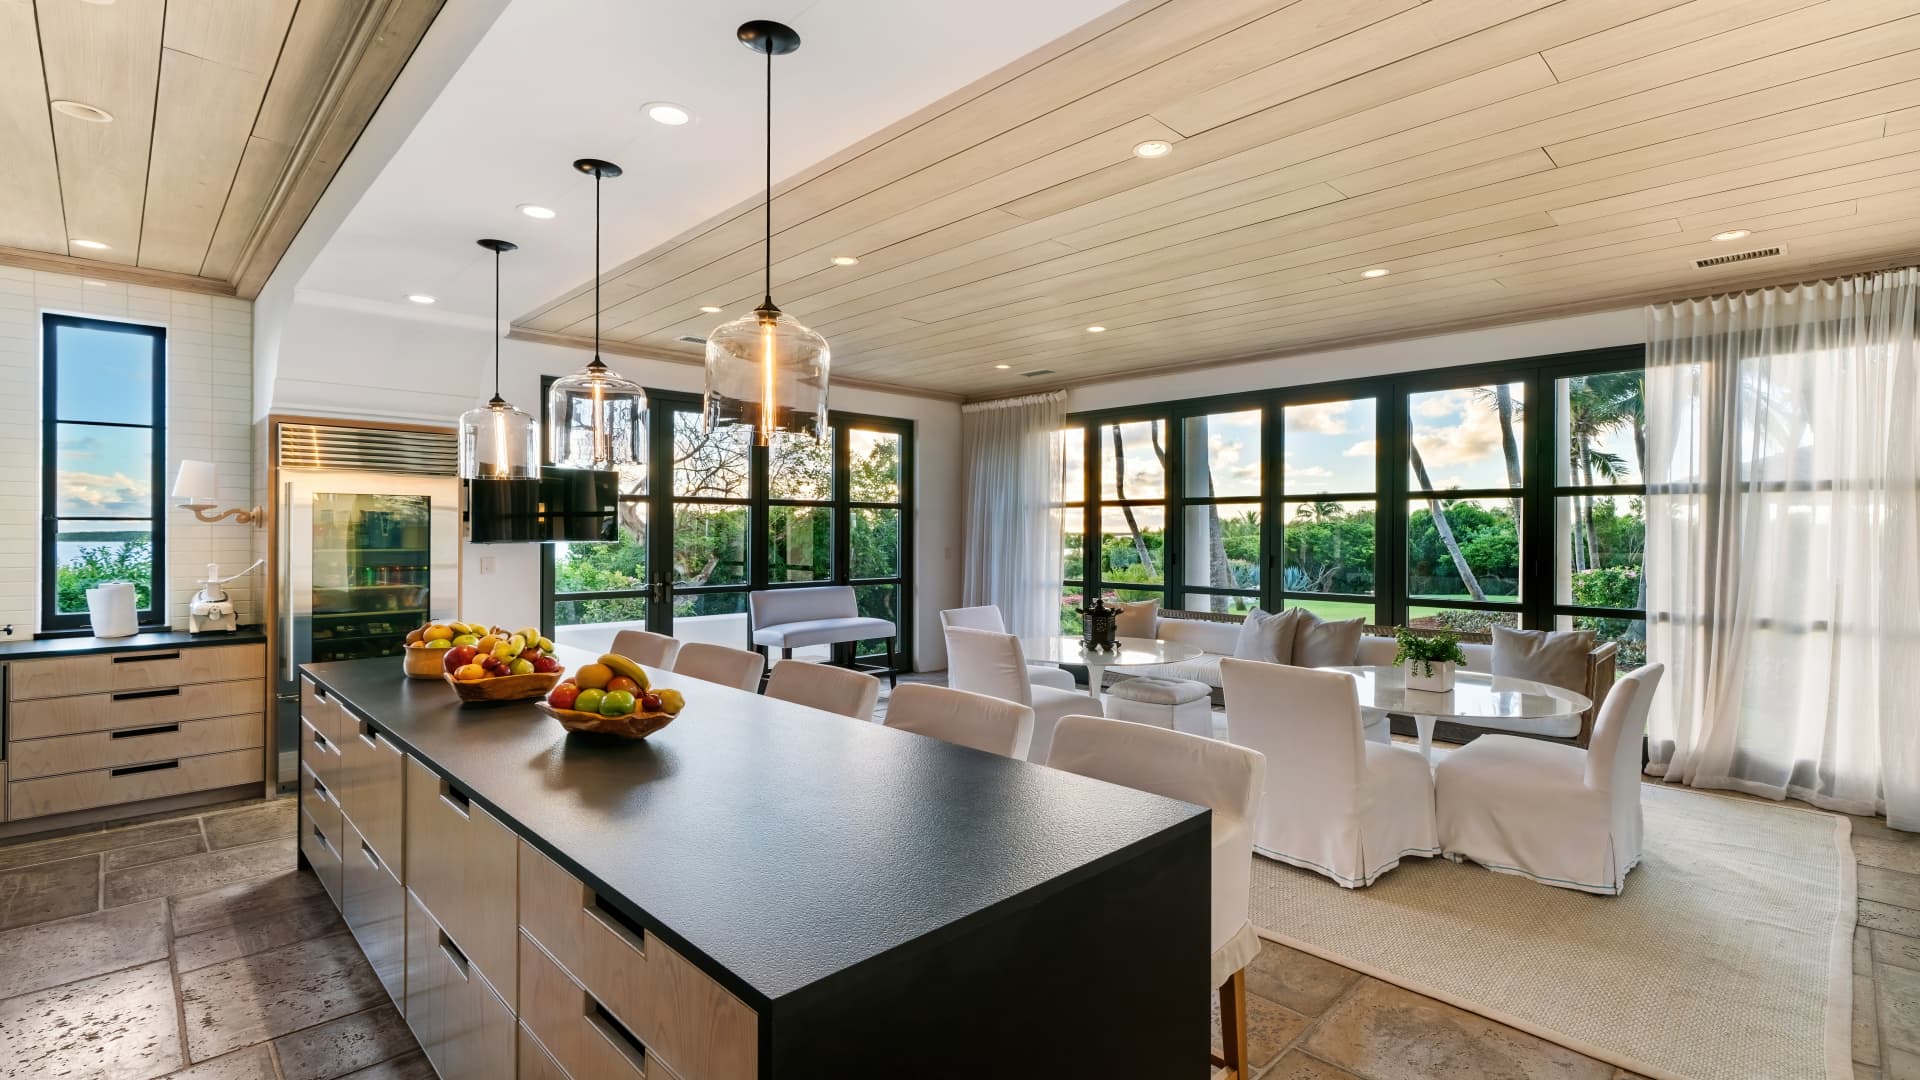 The dining area in open-concept kitchen.